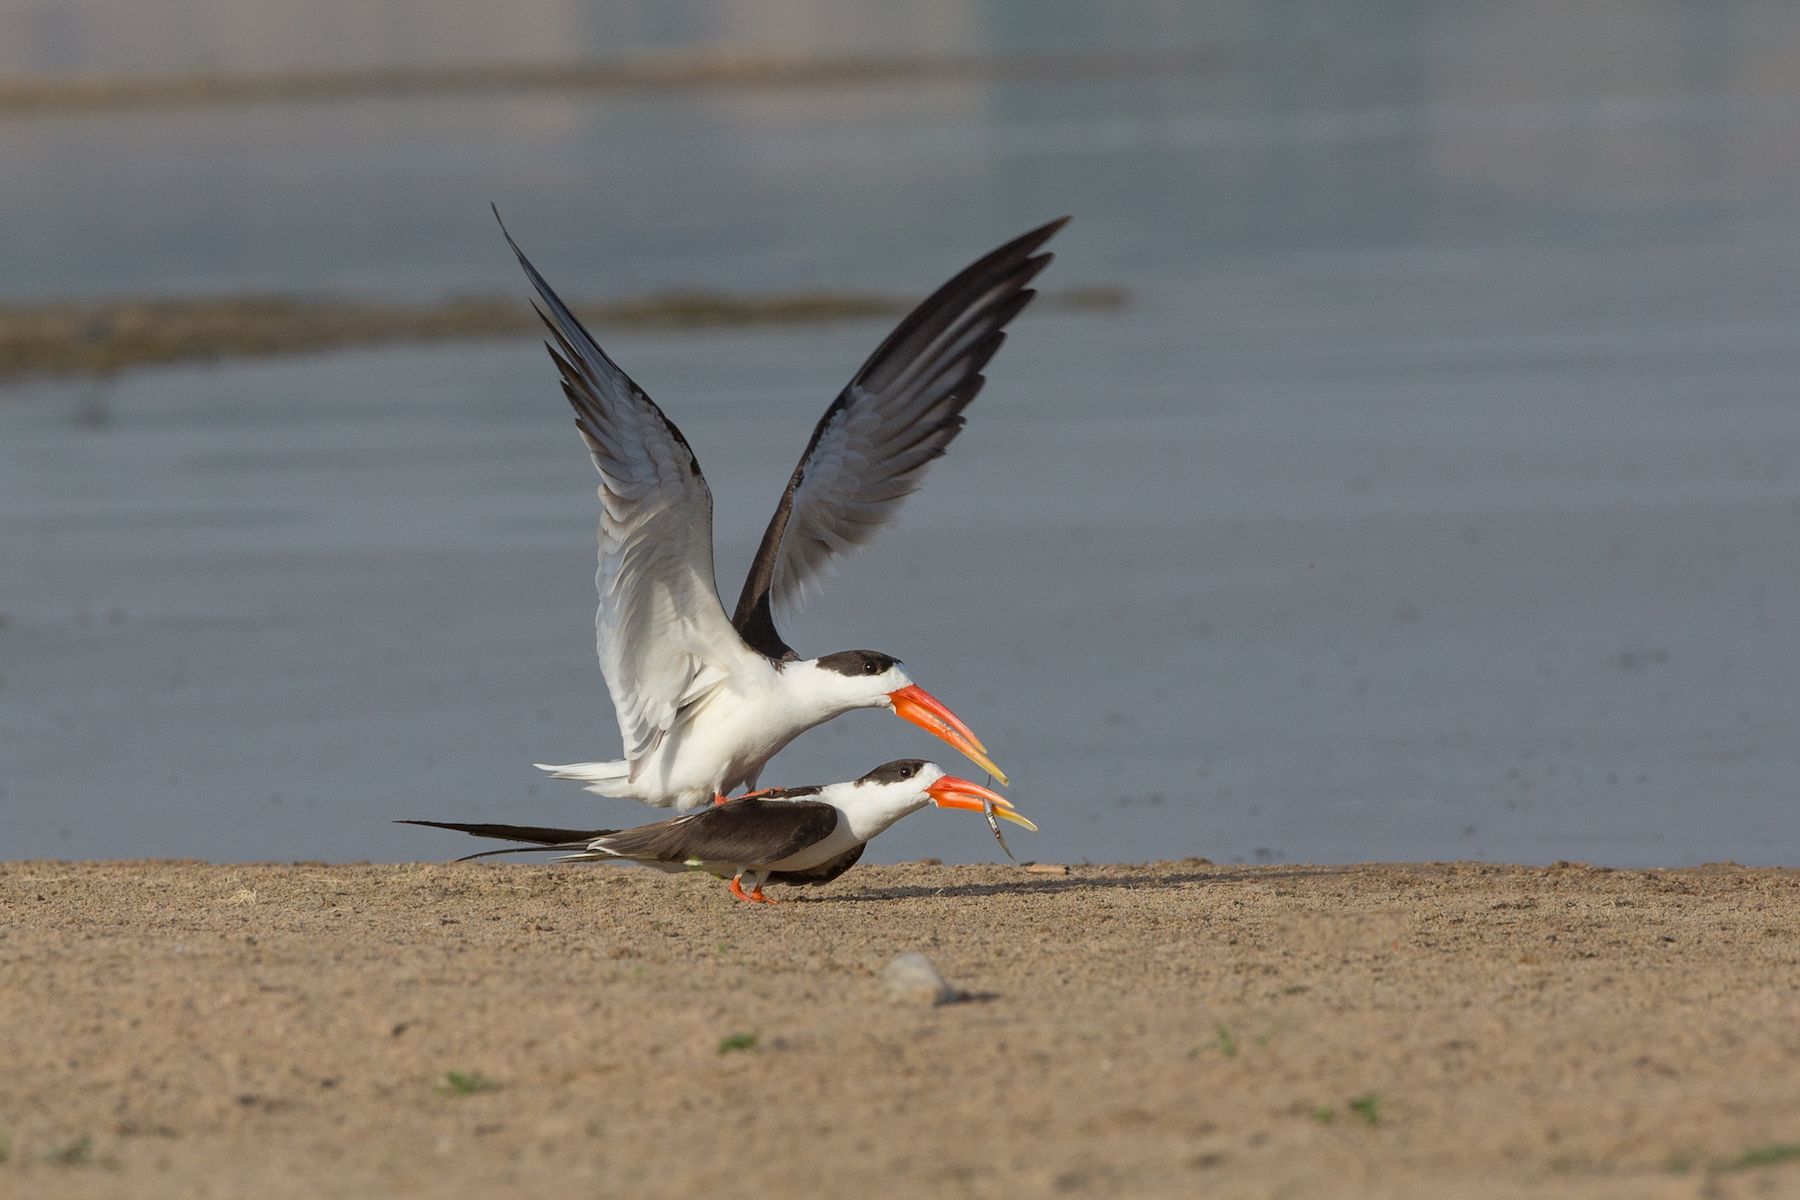 Indian Skimmers on an India photography tour by Inger Vandyke